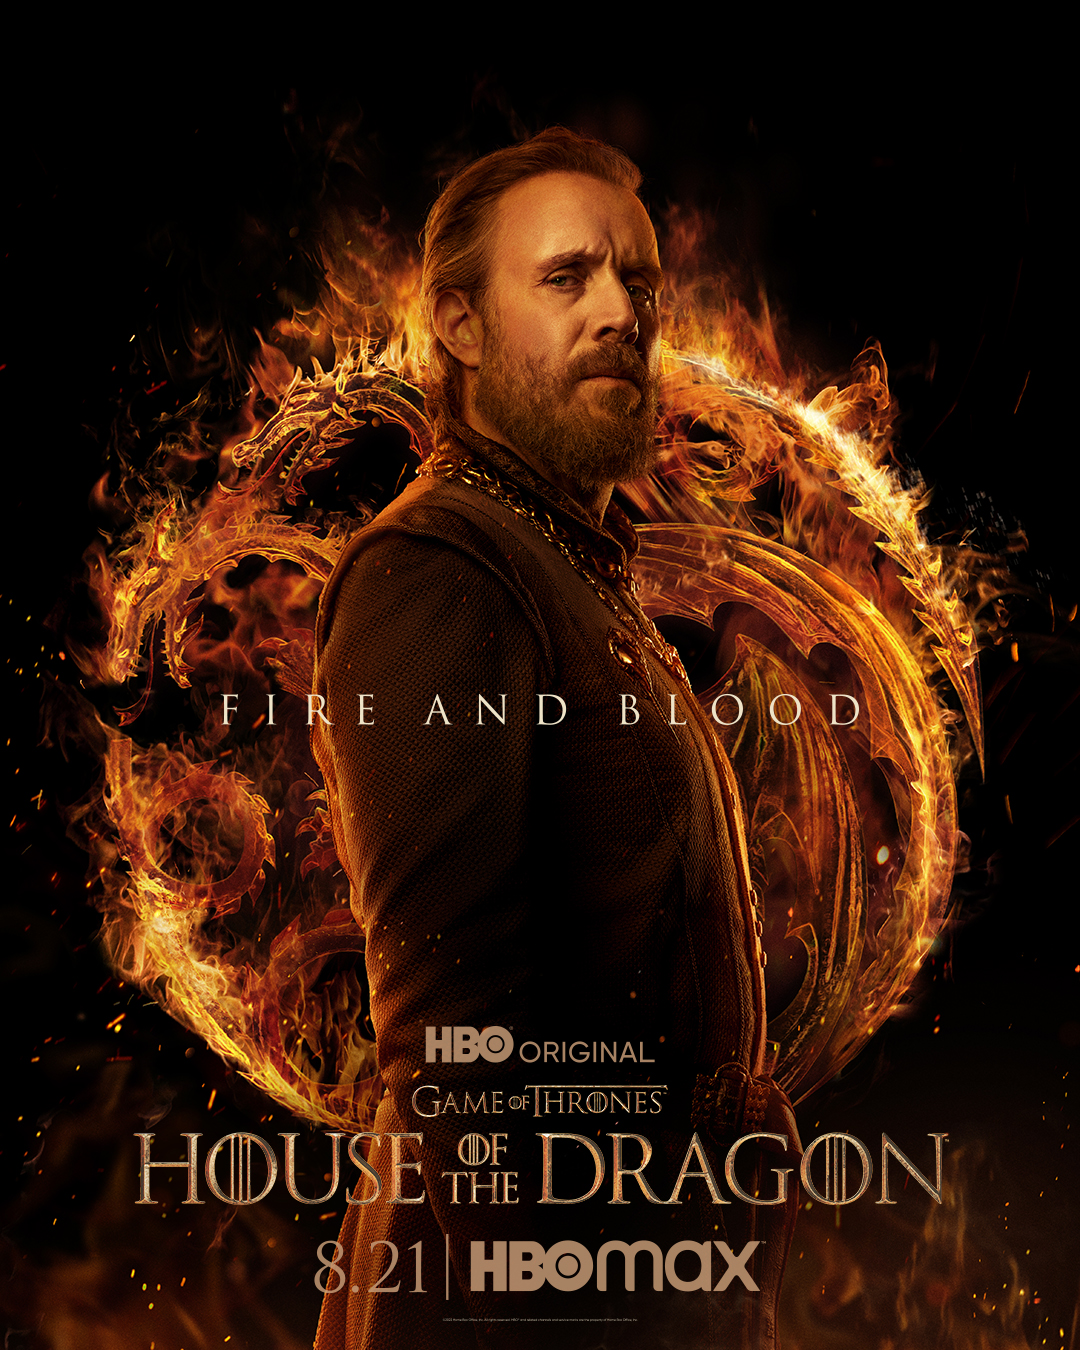 Game of Thrones - House of the Dragon [HBO - 2022] FR8c9wvWUAMqCJ1?format=jpg&name=large